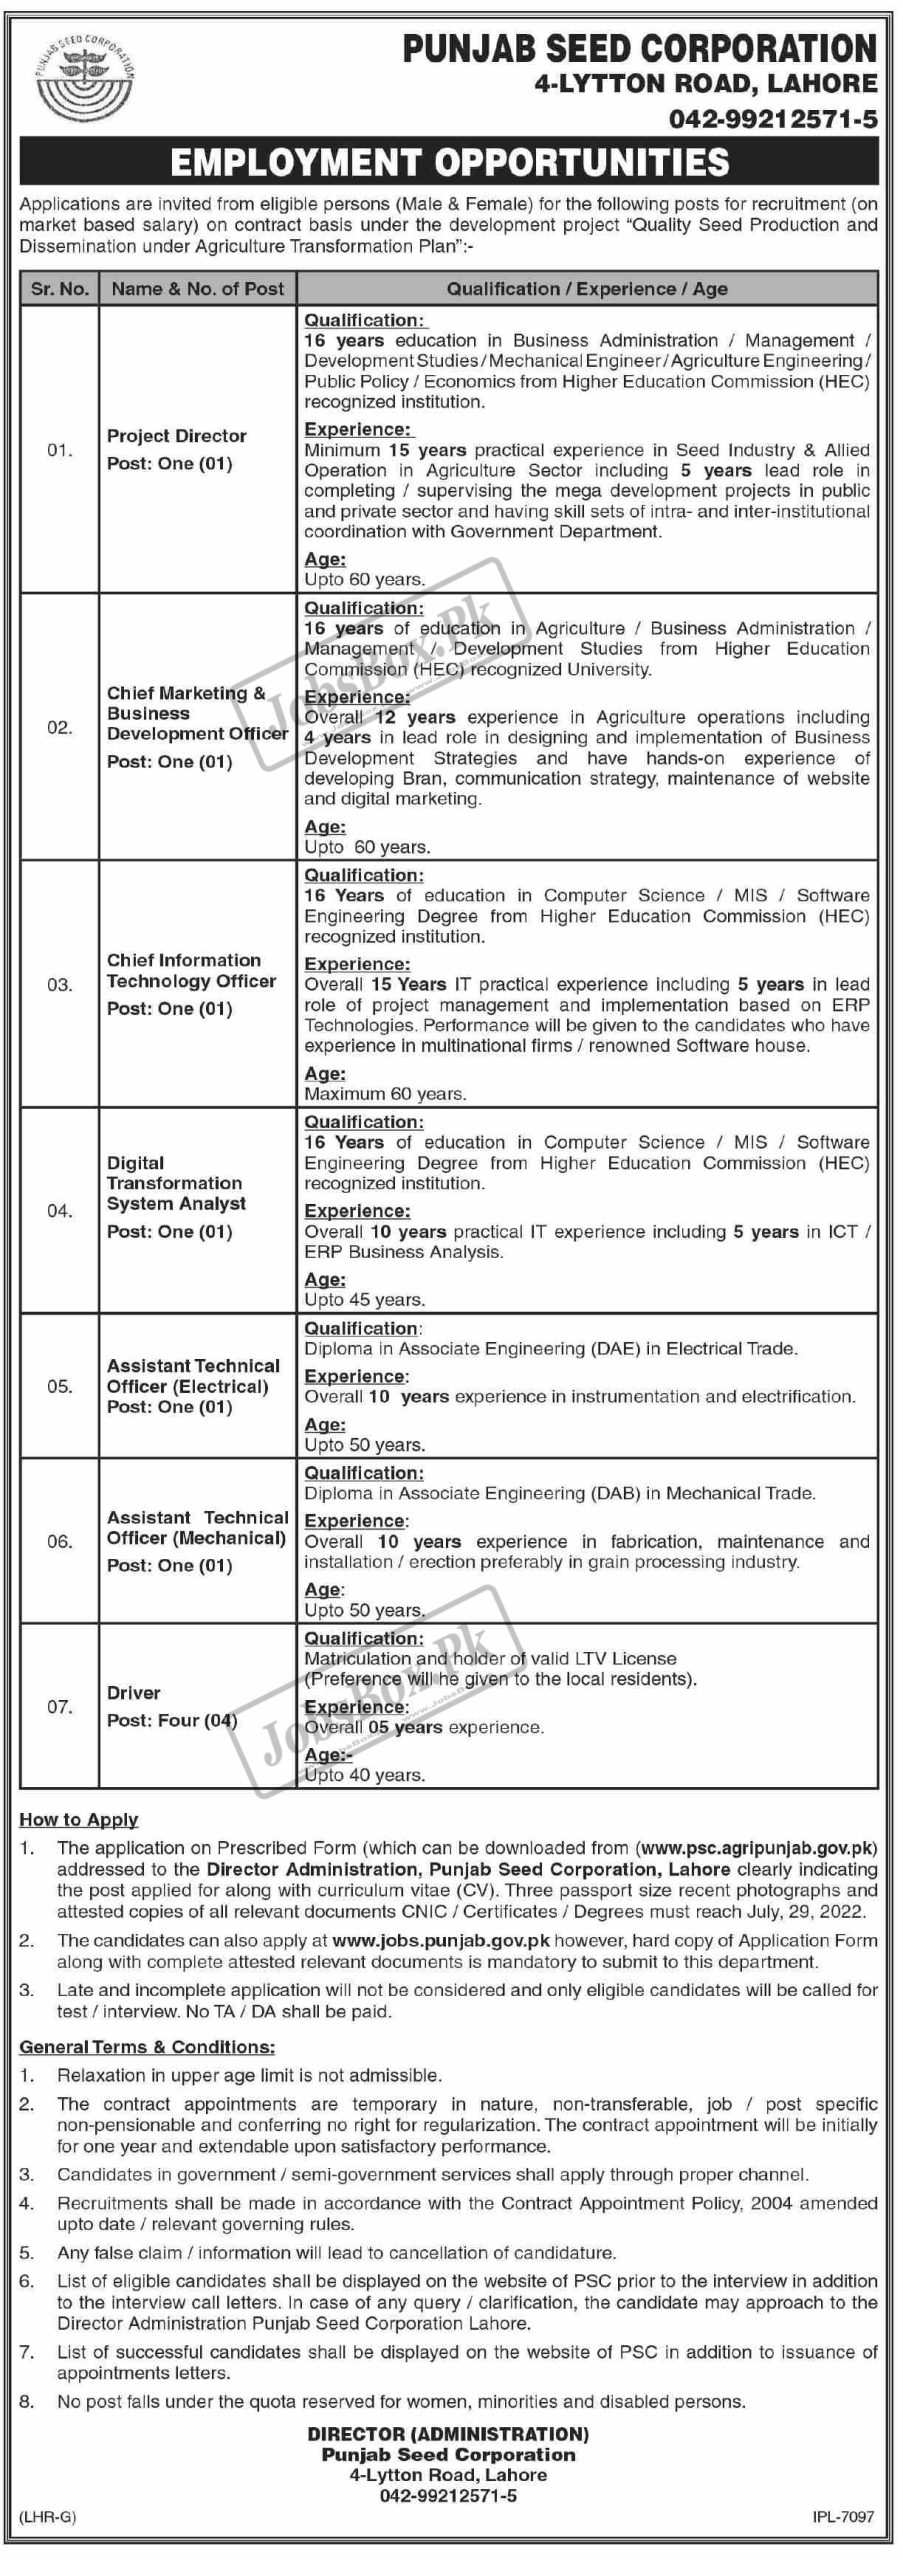 Punjab Seed Corporation Lahore jobs 2022 Application Form